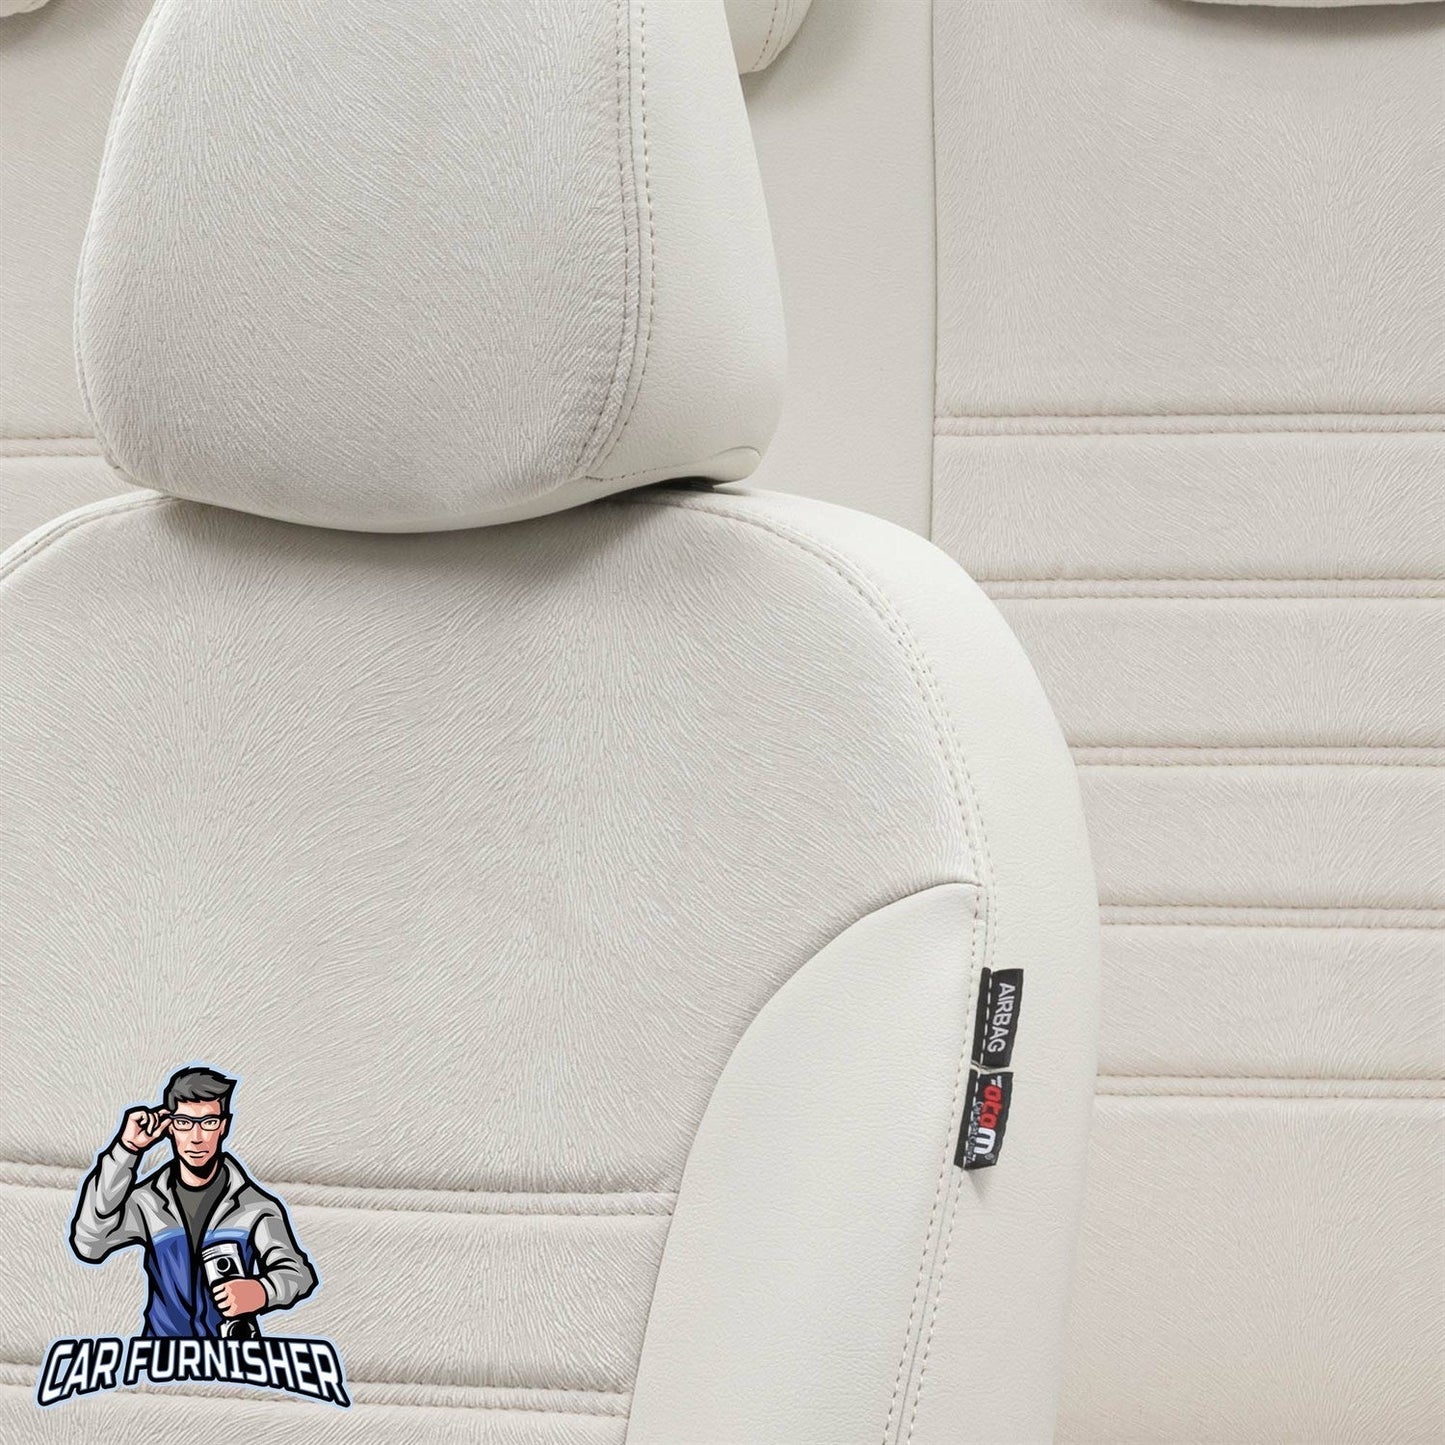 Isuzu N35 Seat Cover London Foal Feather Design Ivory Leather & Foal Feather